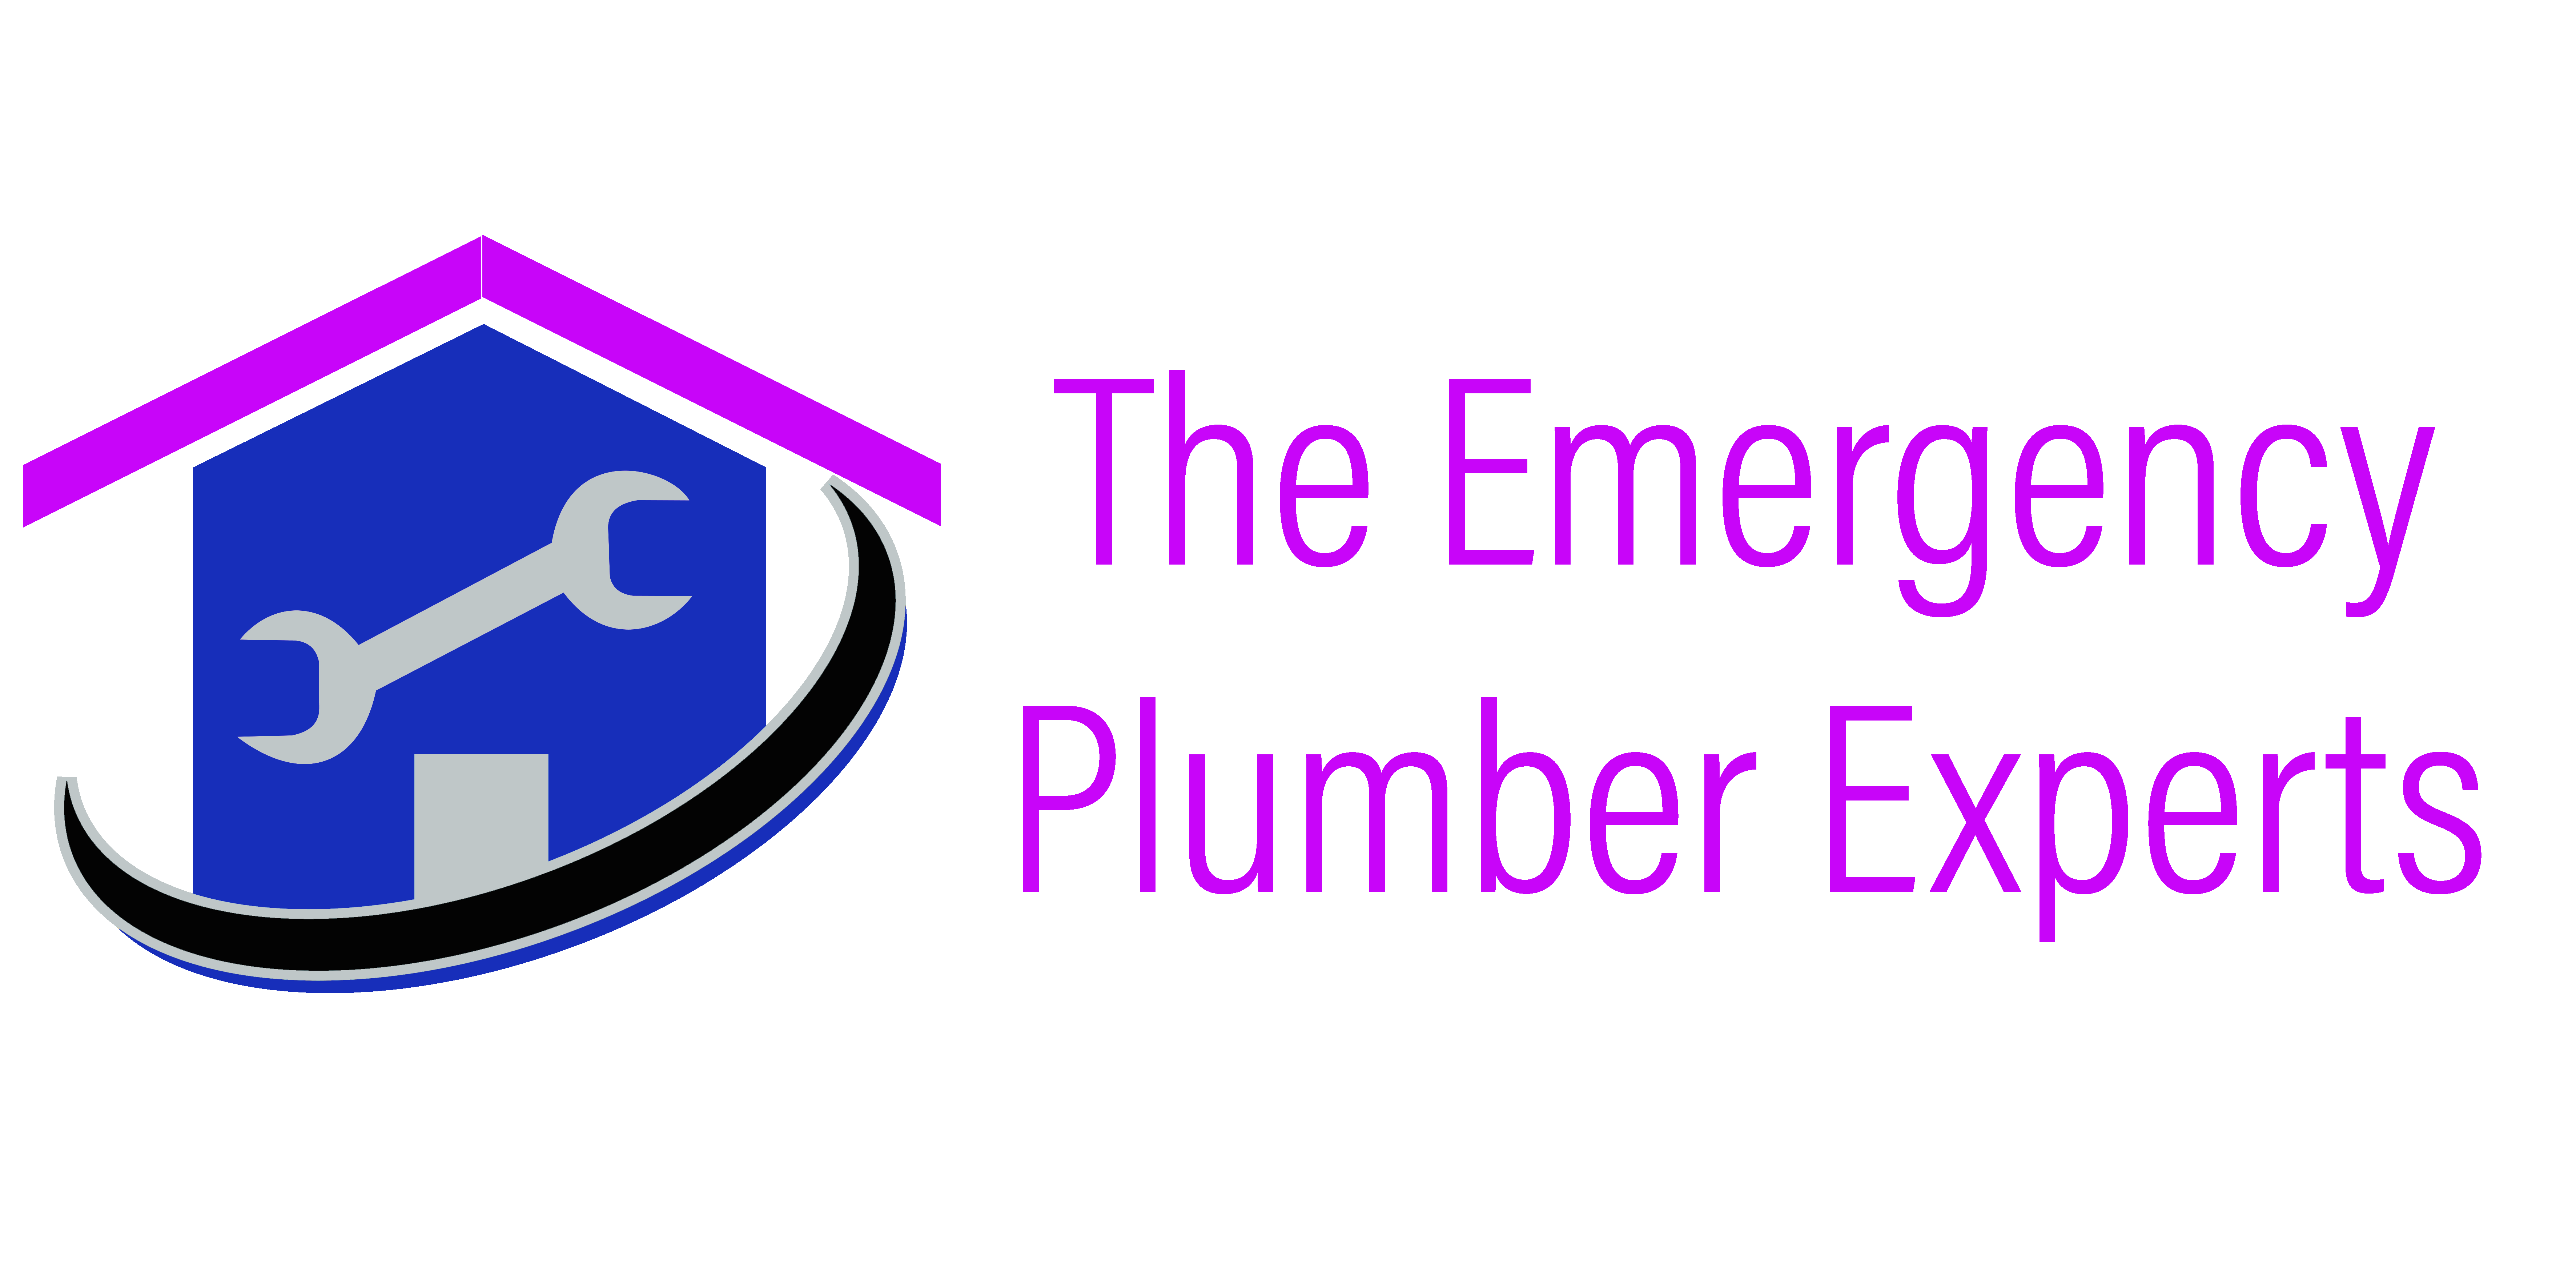 The Emergency Plumber Experts